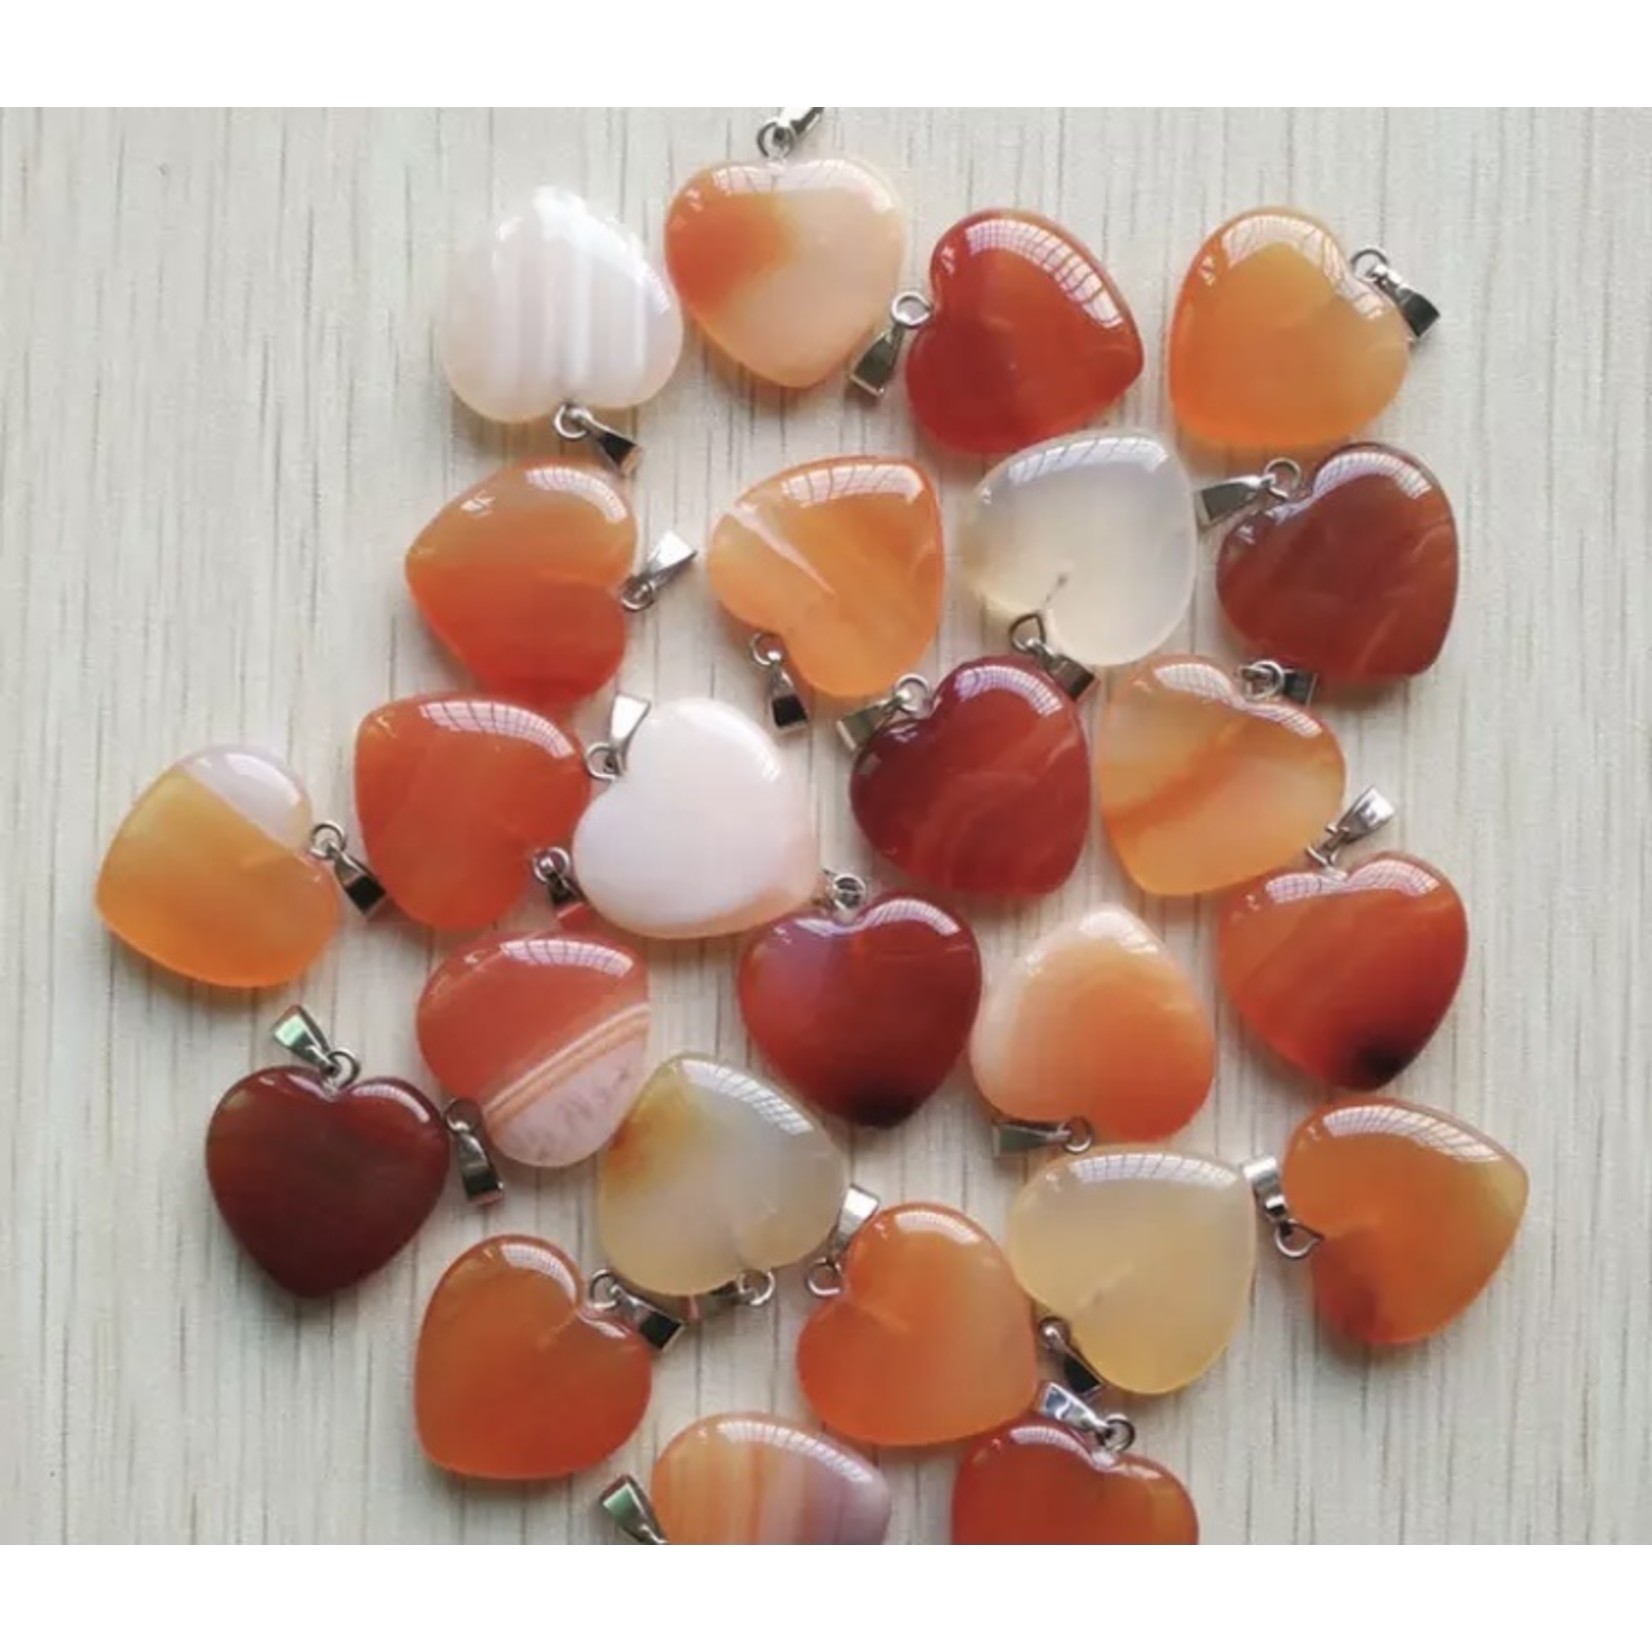 heart necklace stripped agate